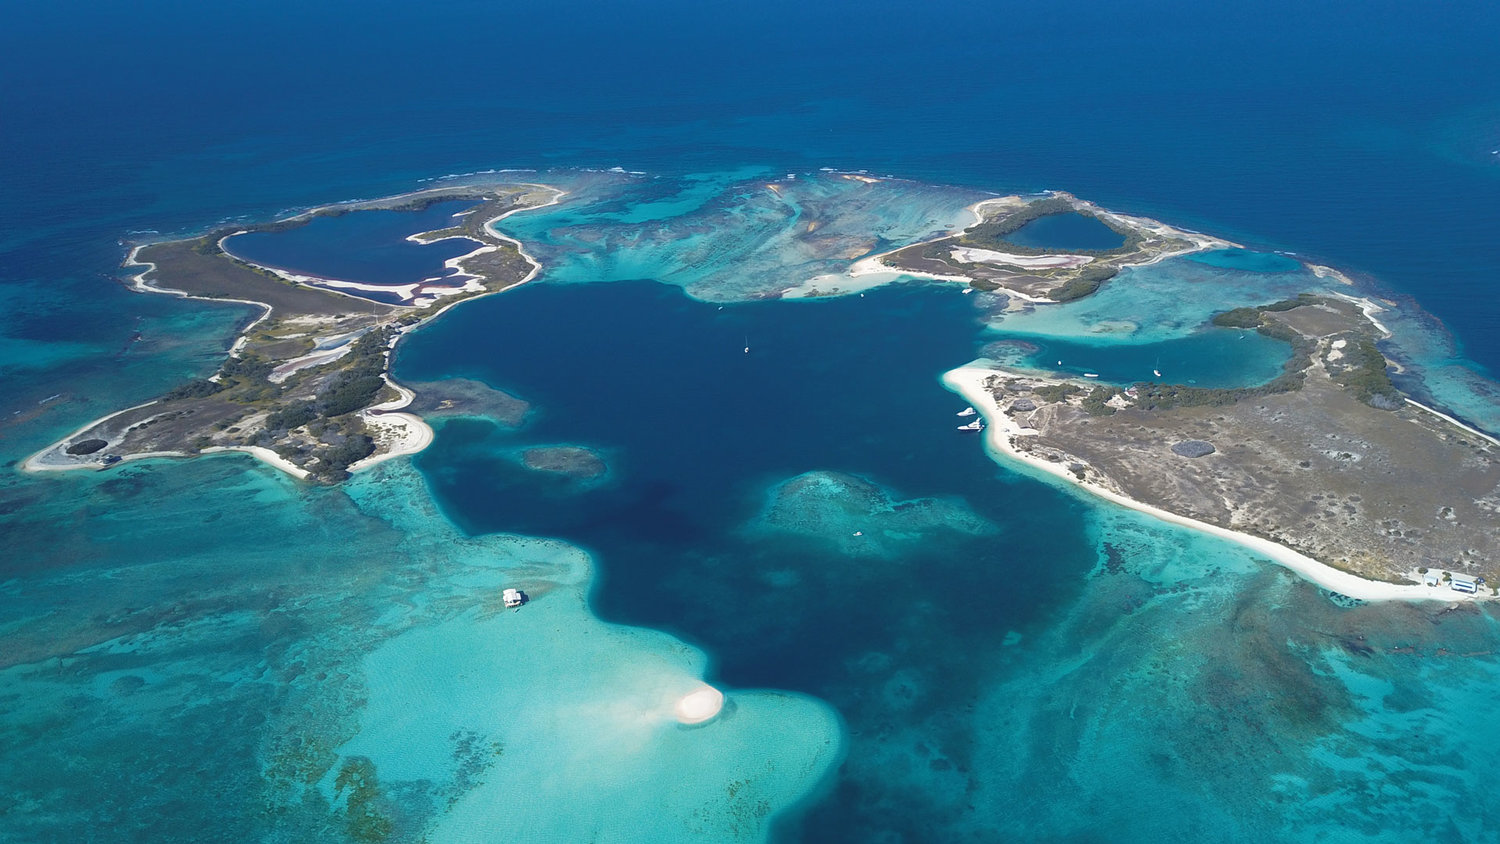 Los Roques Kitecruise | The Rider Experience